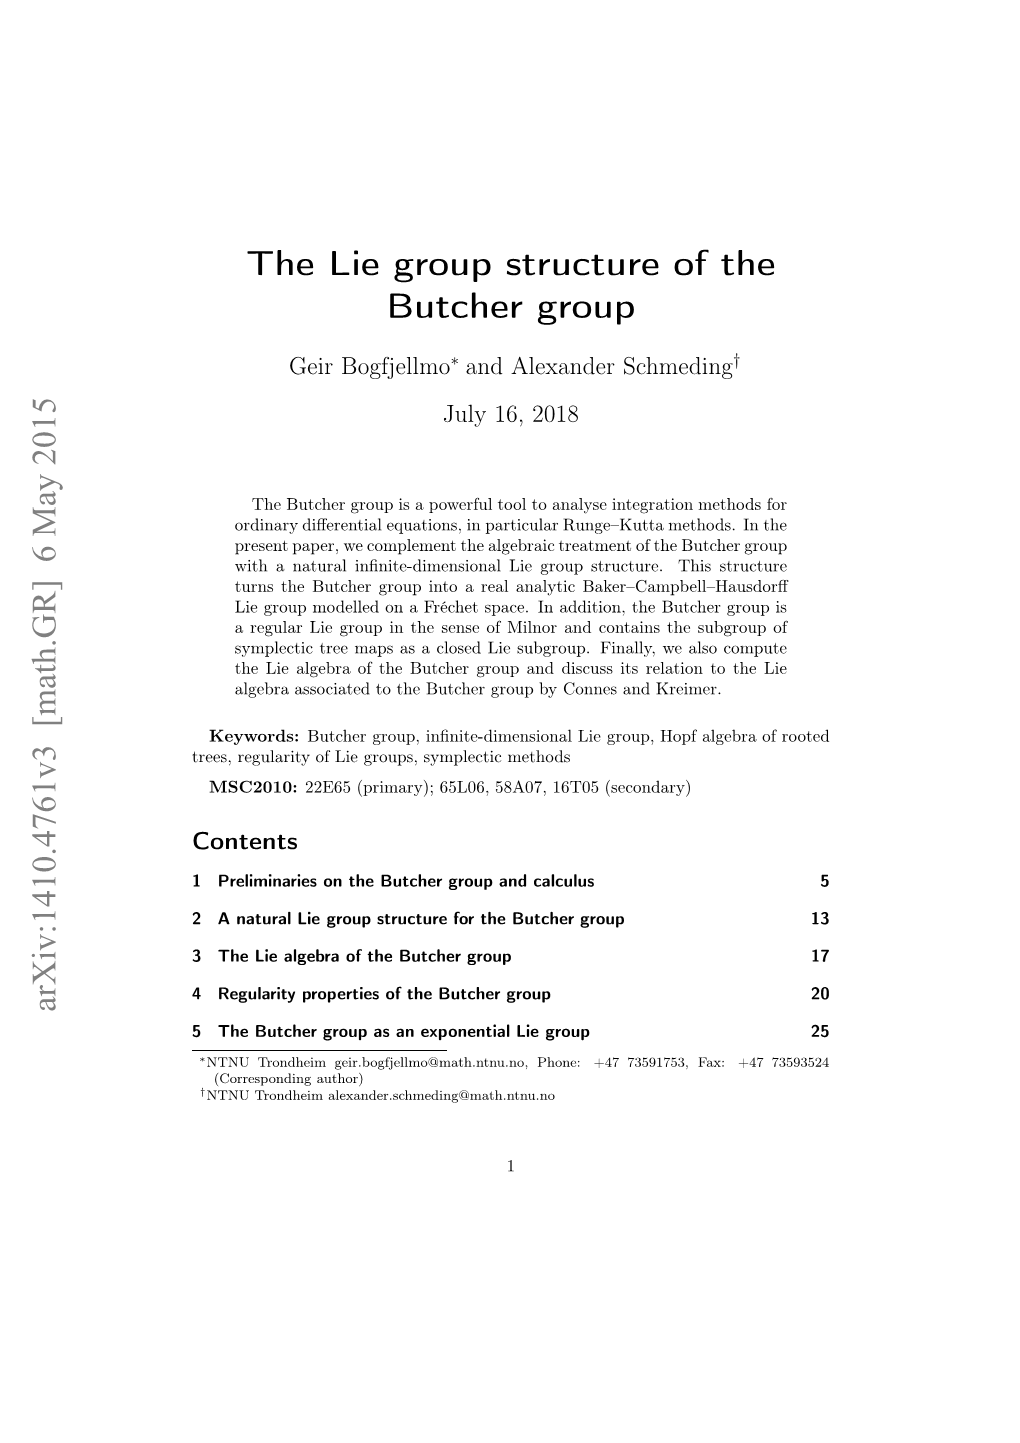 The Lie Group Structure of the Butcher Group